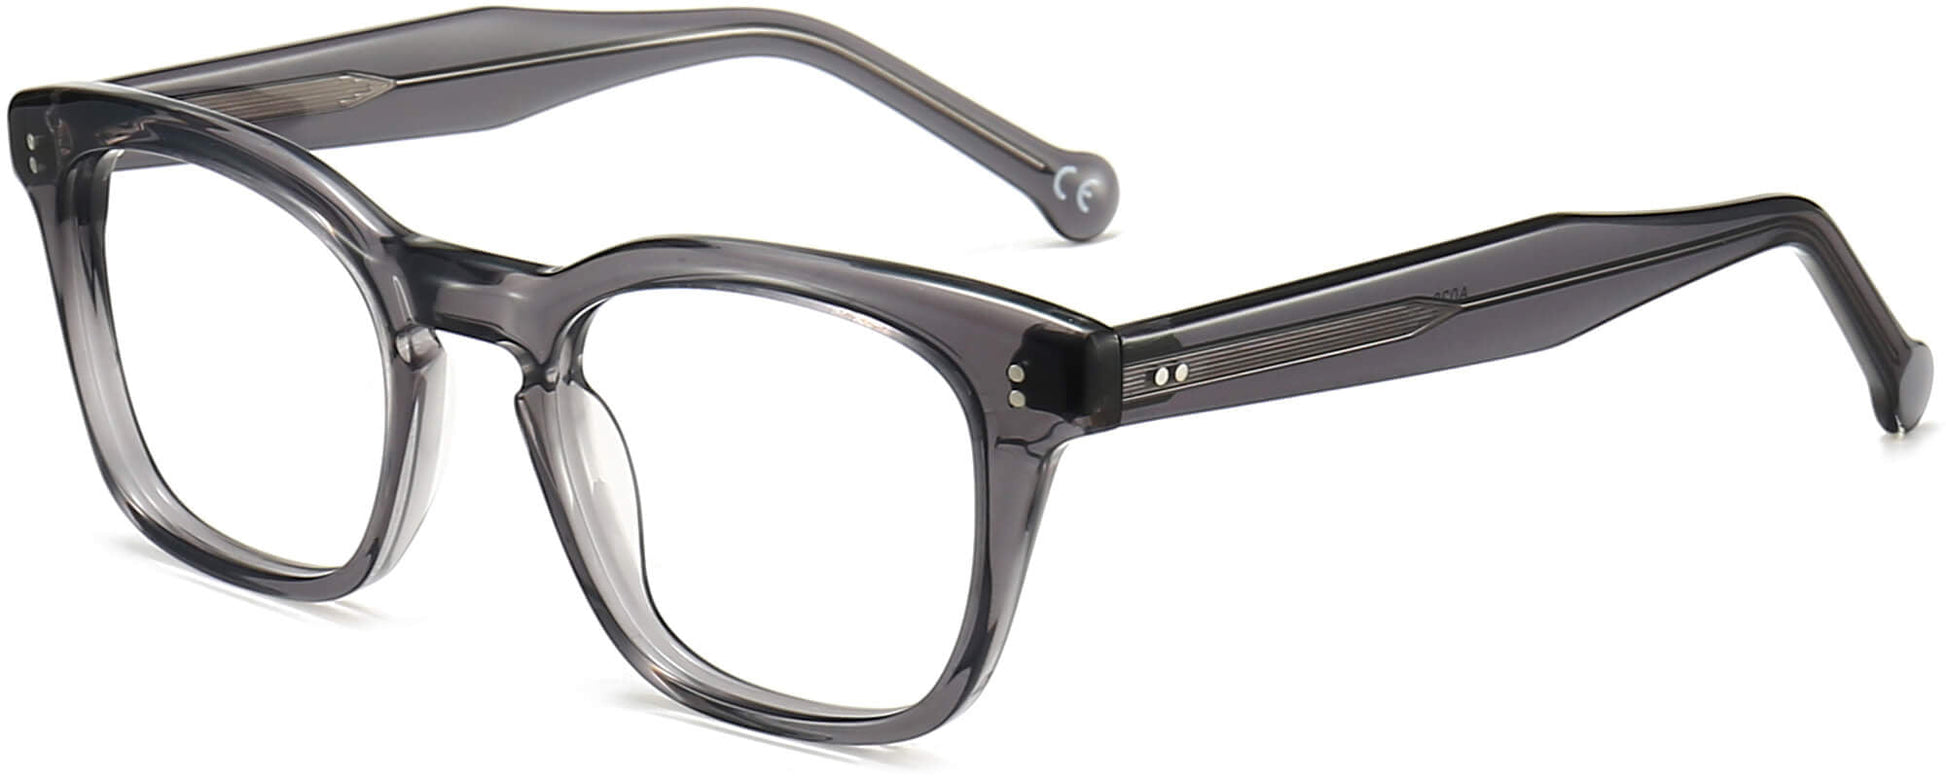 Gustavo Square Gray Eyeglasses from ANRRI, angle view